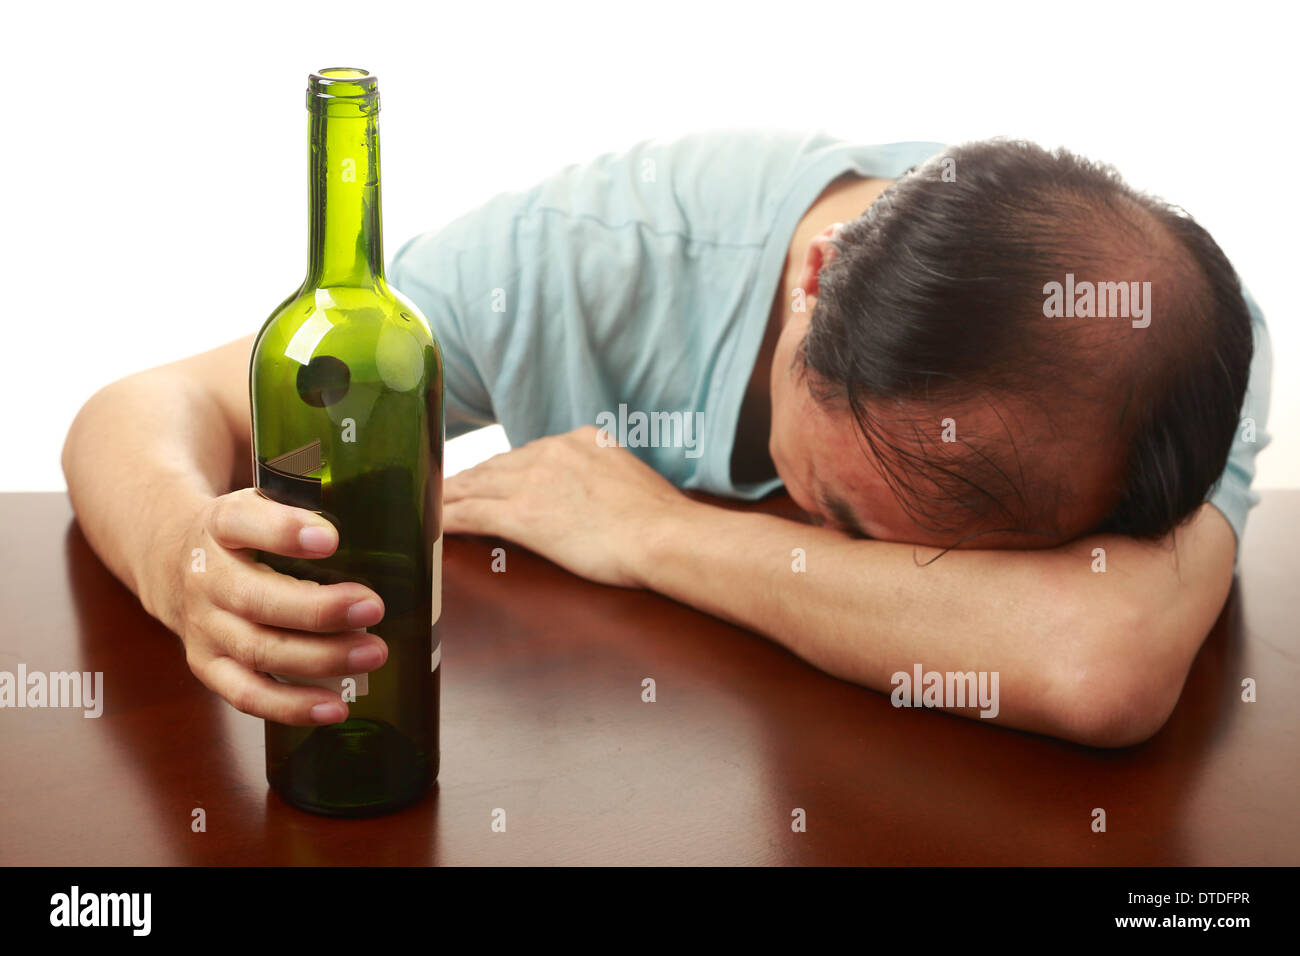 asian-man-sleeping-on-a-table-after-drinking-too-much-DTDFPR.jpg